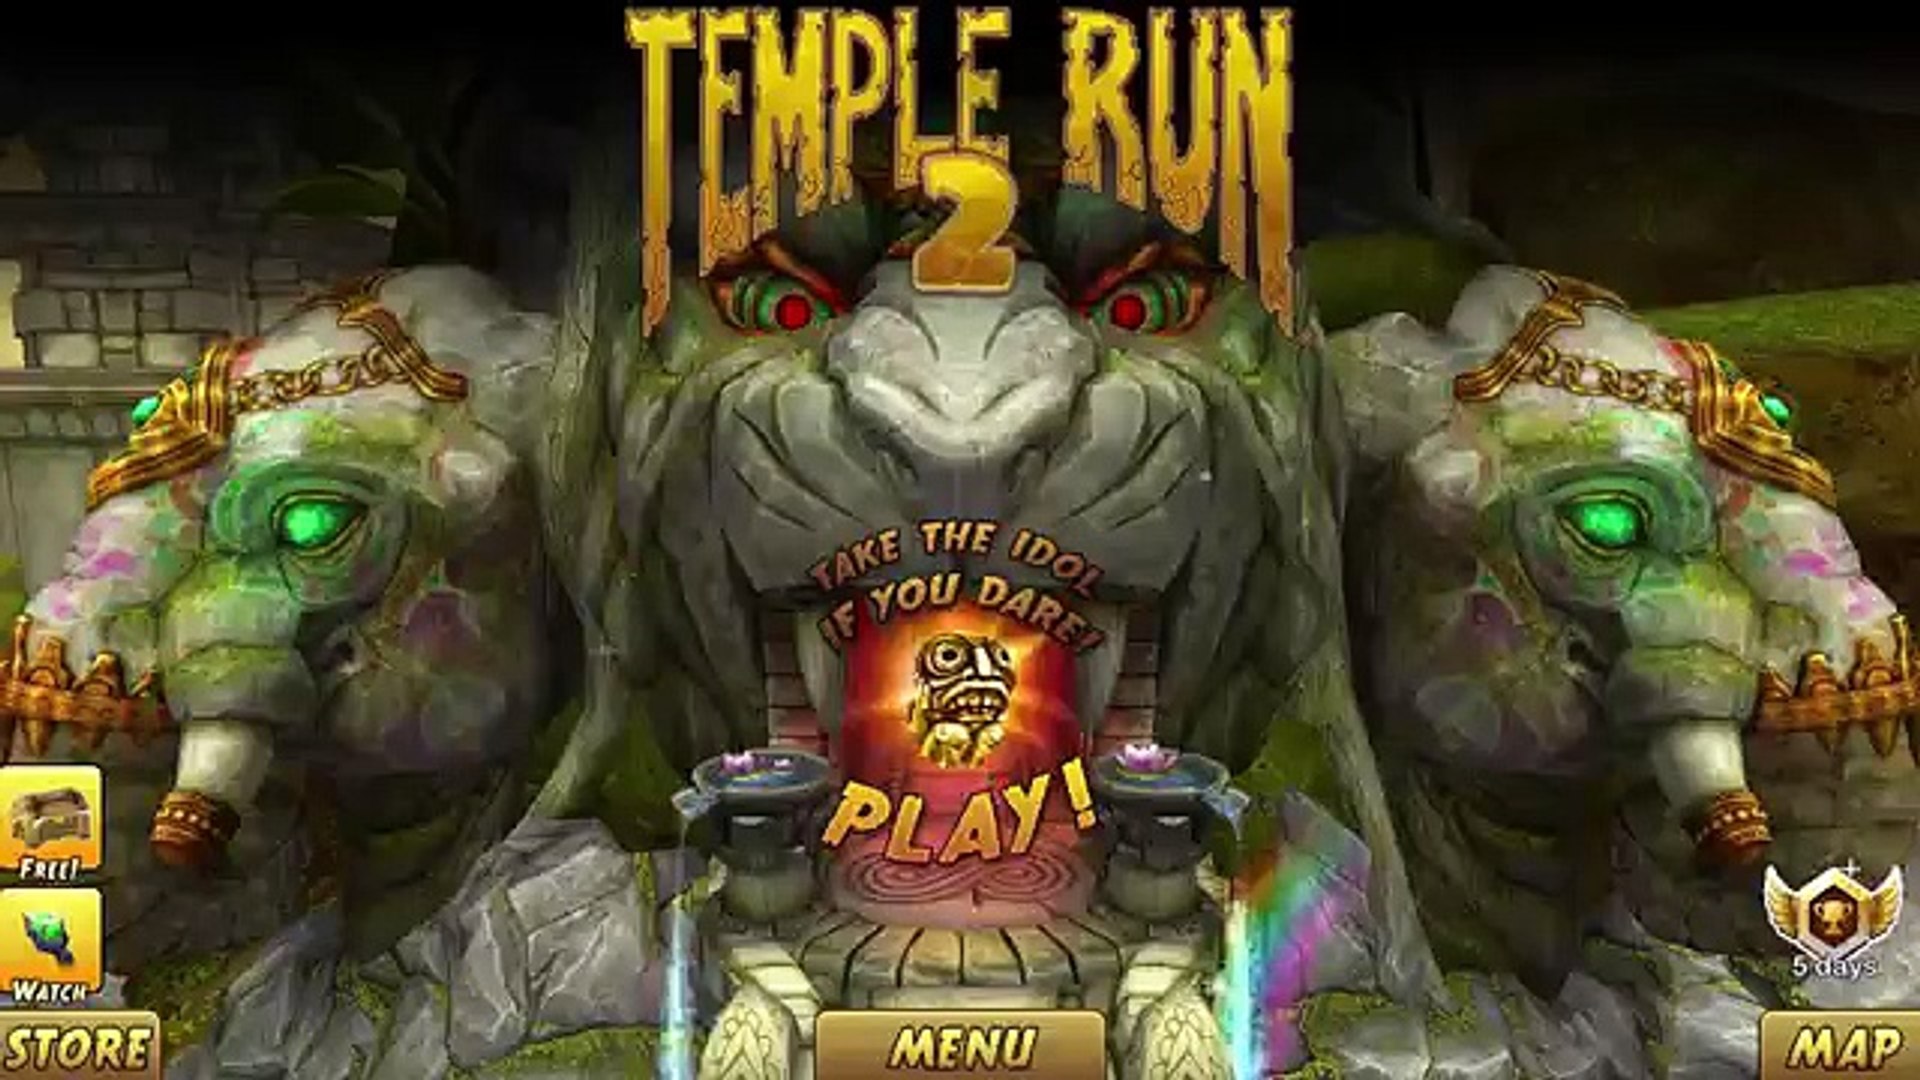 Temple Run 2 All 5 Maps Play Lost Jungle | Blazing Sand | Spooky Summit |  Frozen Shadow | Sky Summit - Dailymotion Video